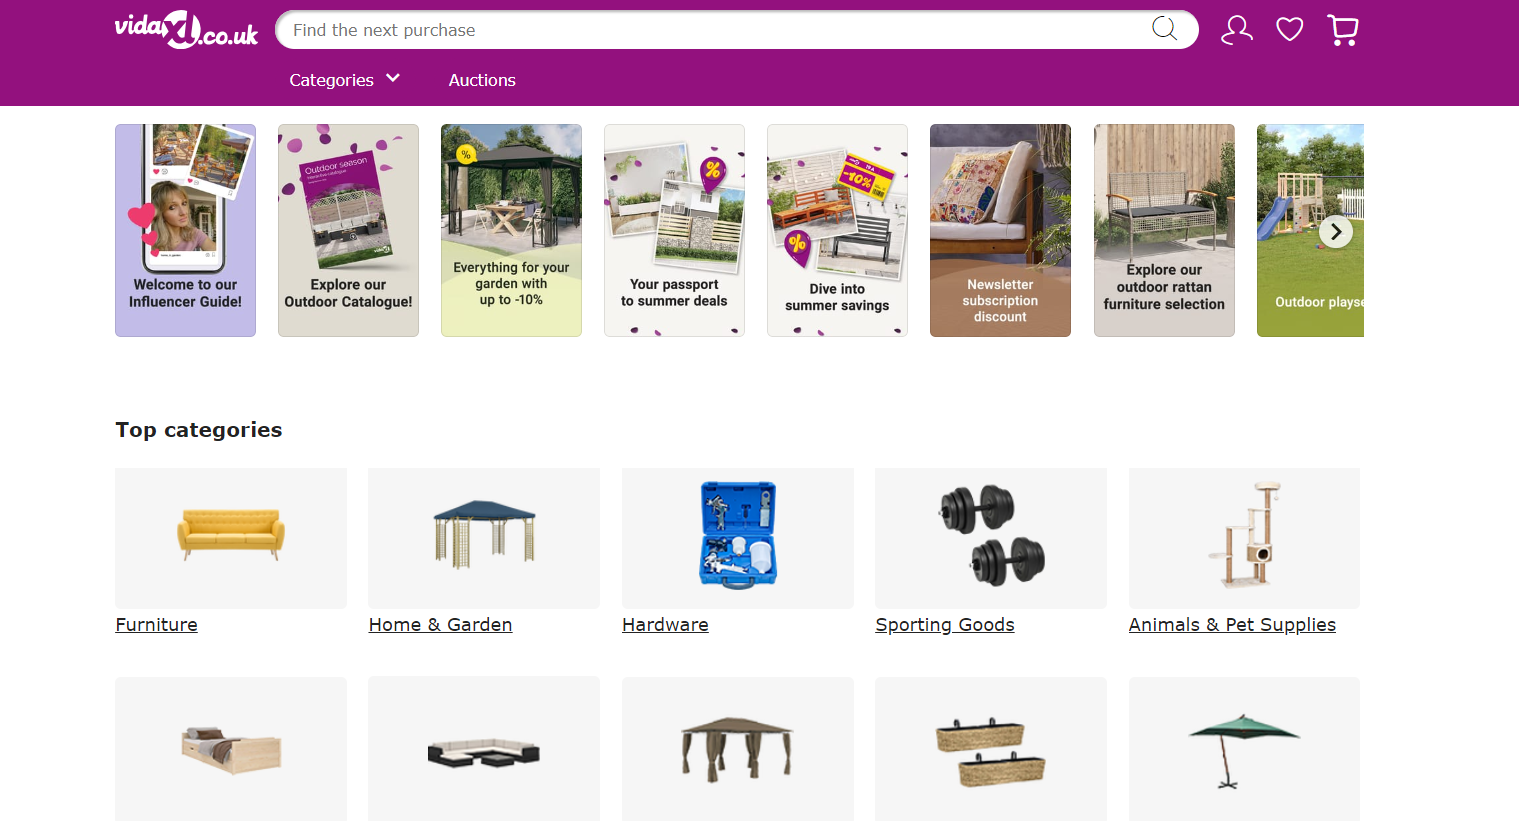 VidaXL UK specializes in home products and offers a wide array of items at competitive prices. They provide free shipping on all products and cover multiple product categories, making them a top choice for UK dropshippers. 